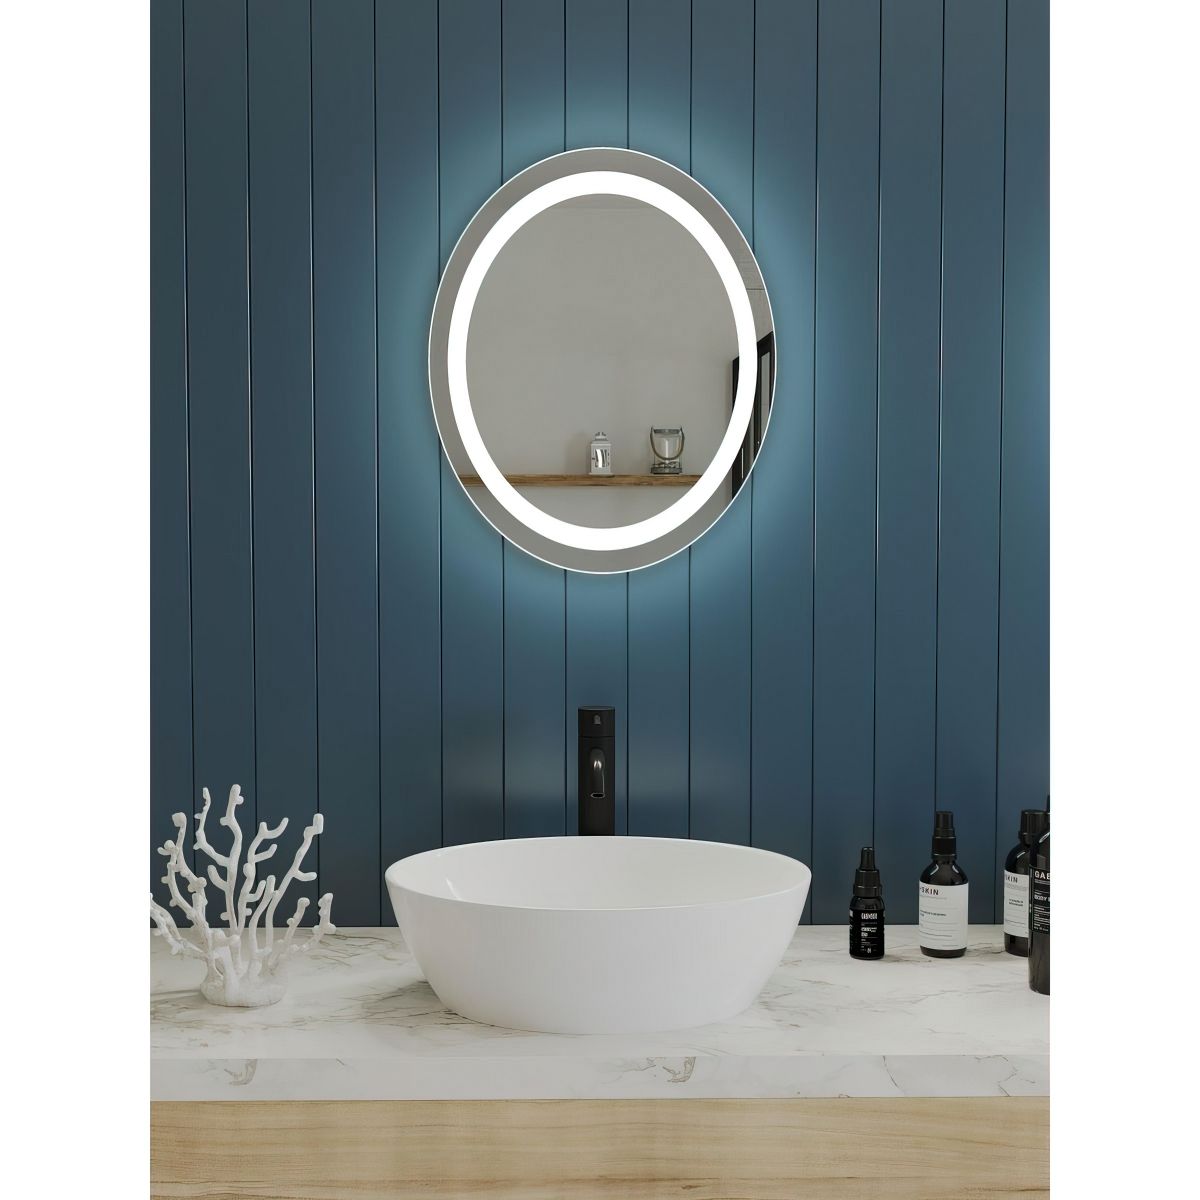 Captarent 22 In. X 28 In. White LED Wall Mirror - Bees Lighting